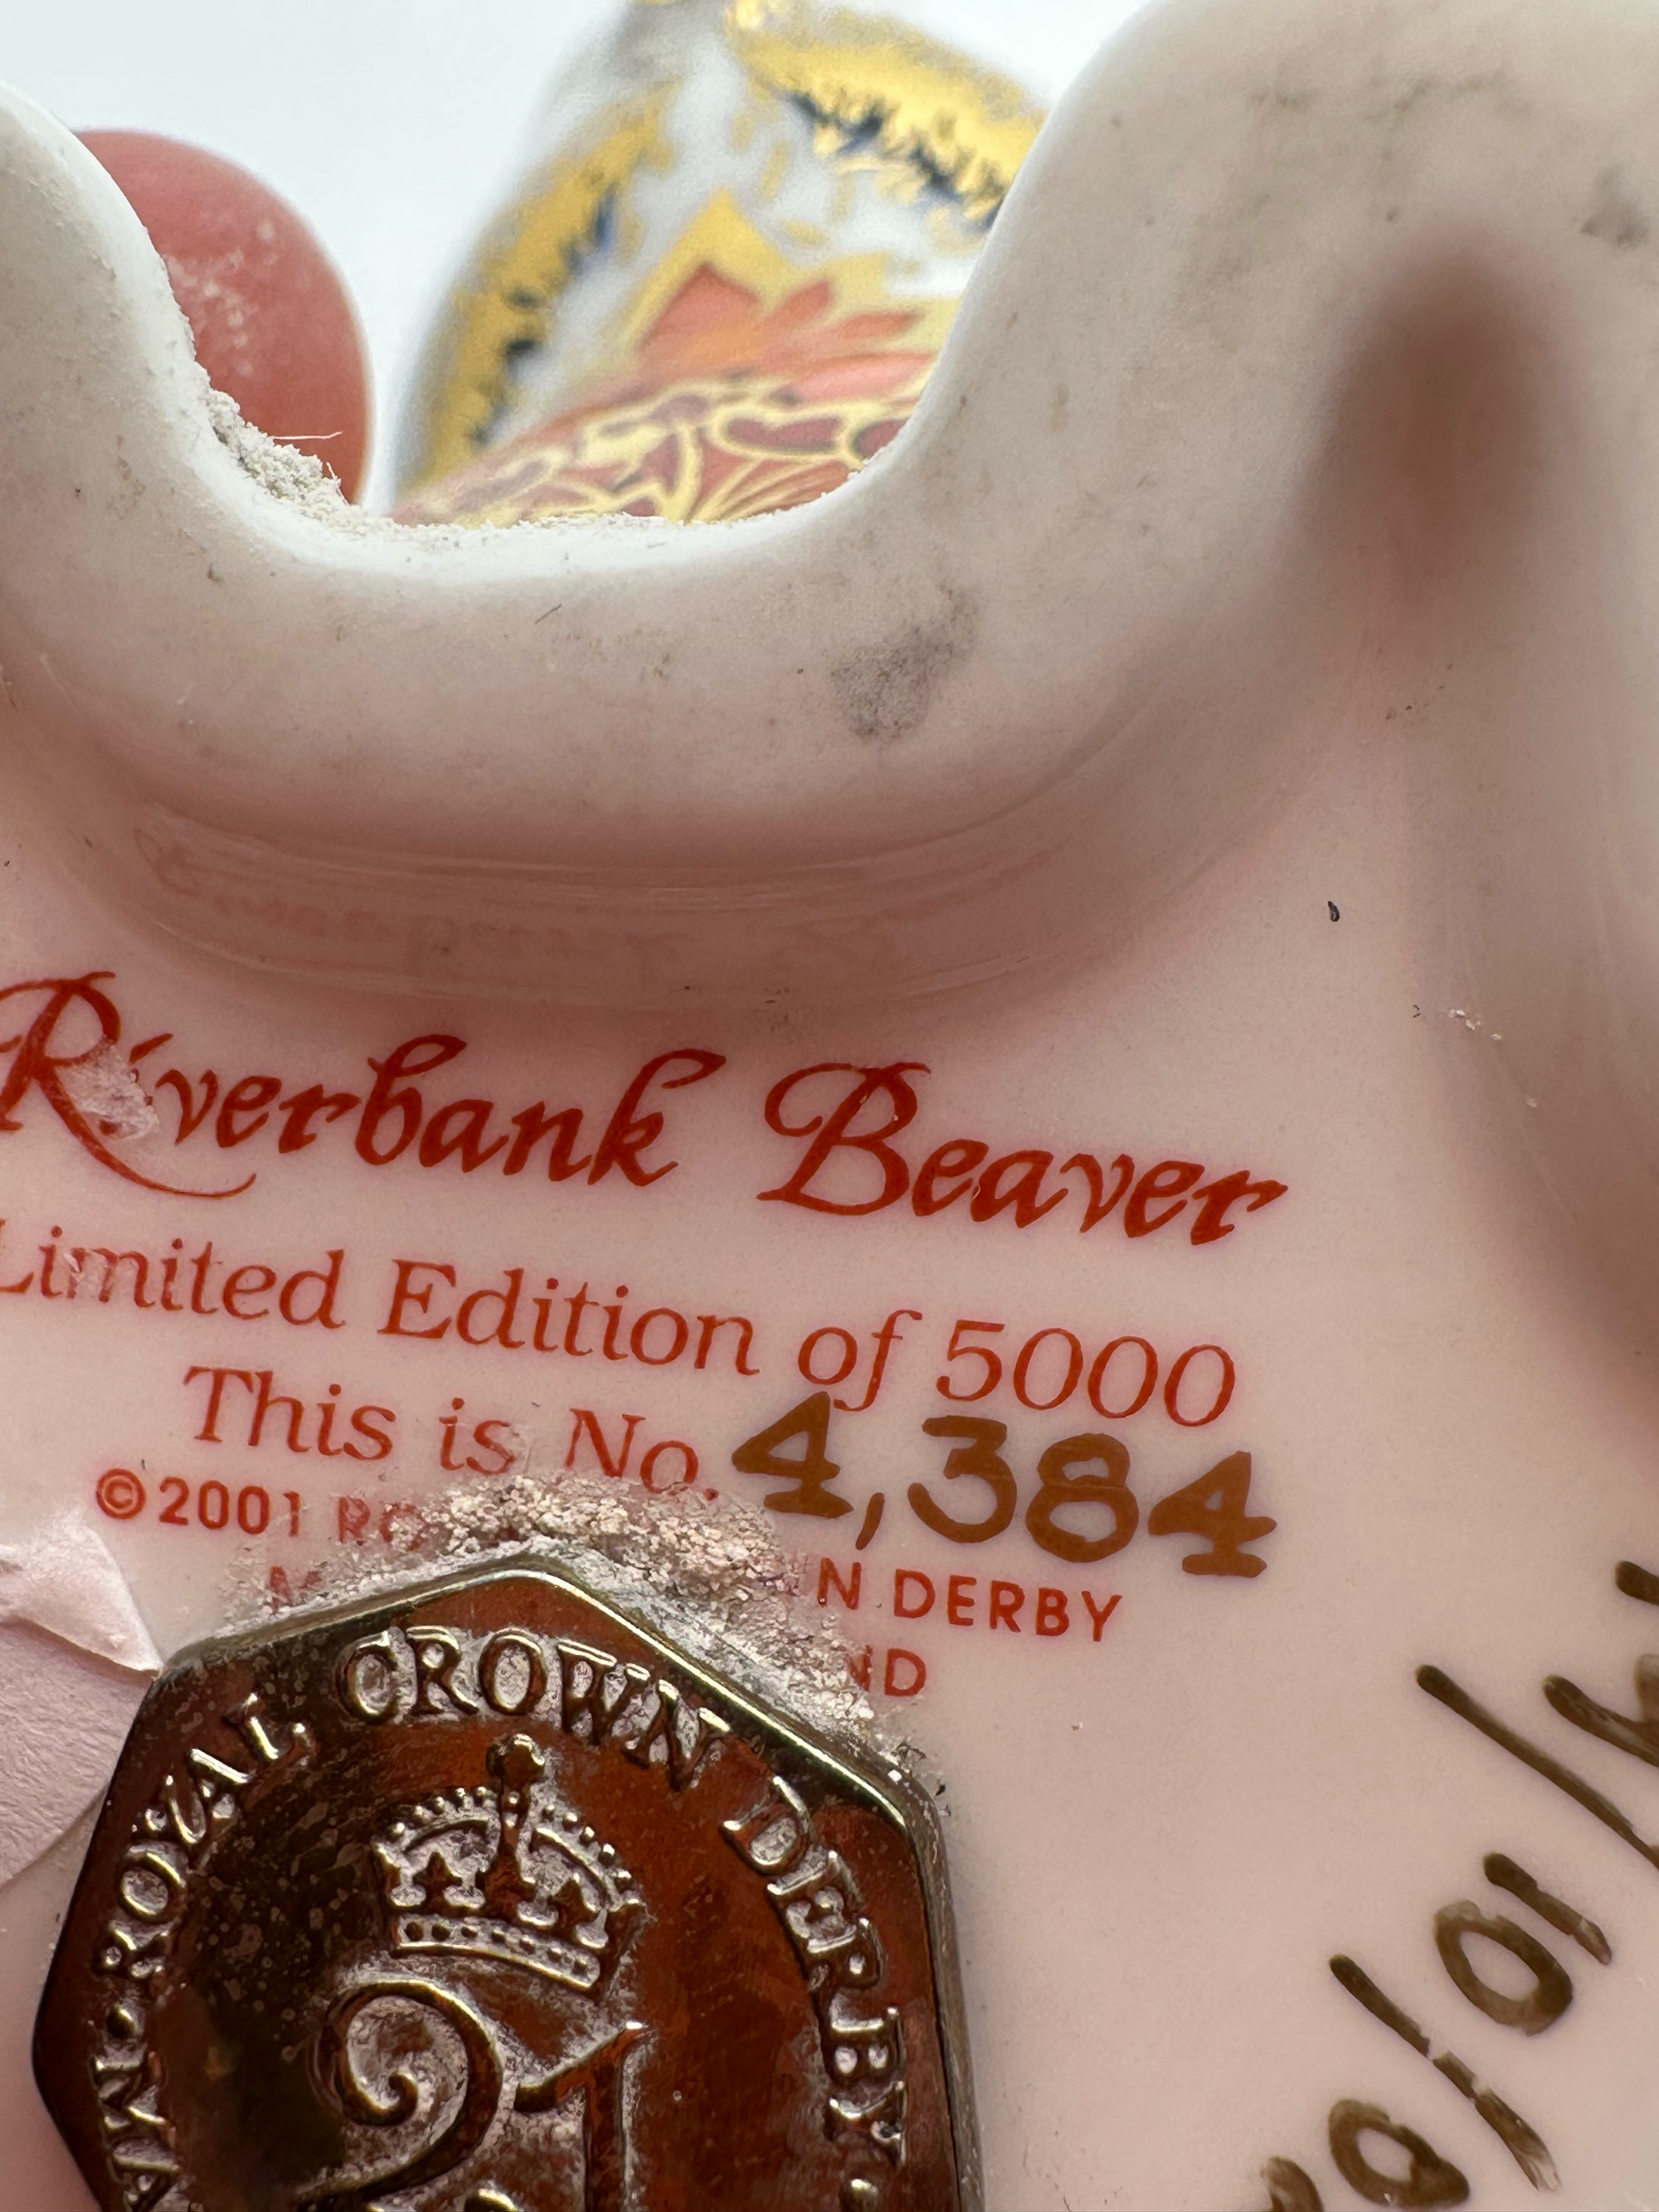 Vintage Royal Crown Derby Riverbank Beaver, Special Edition - Hunt and Bloom